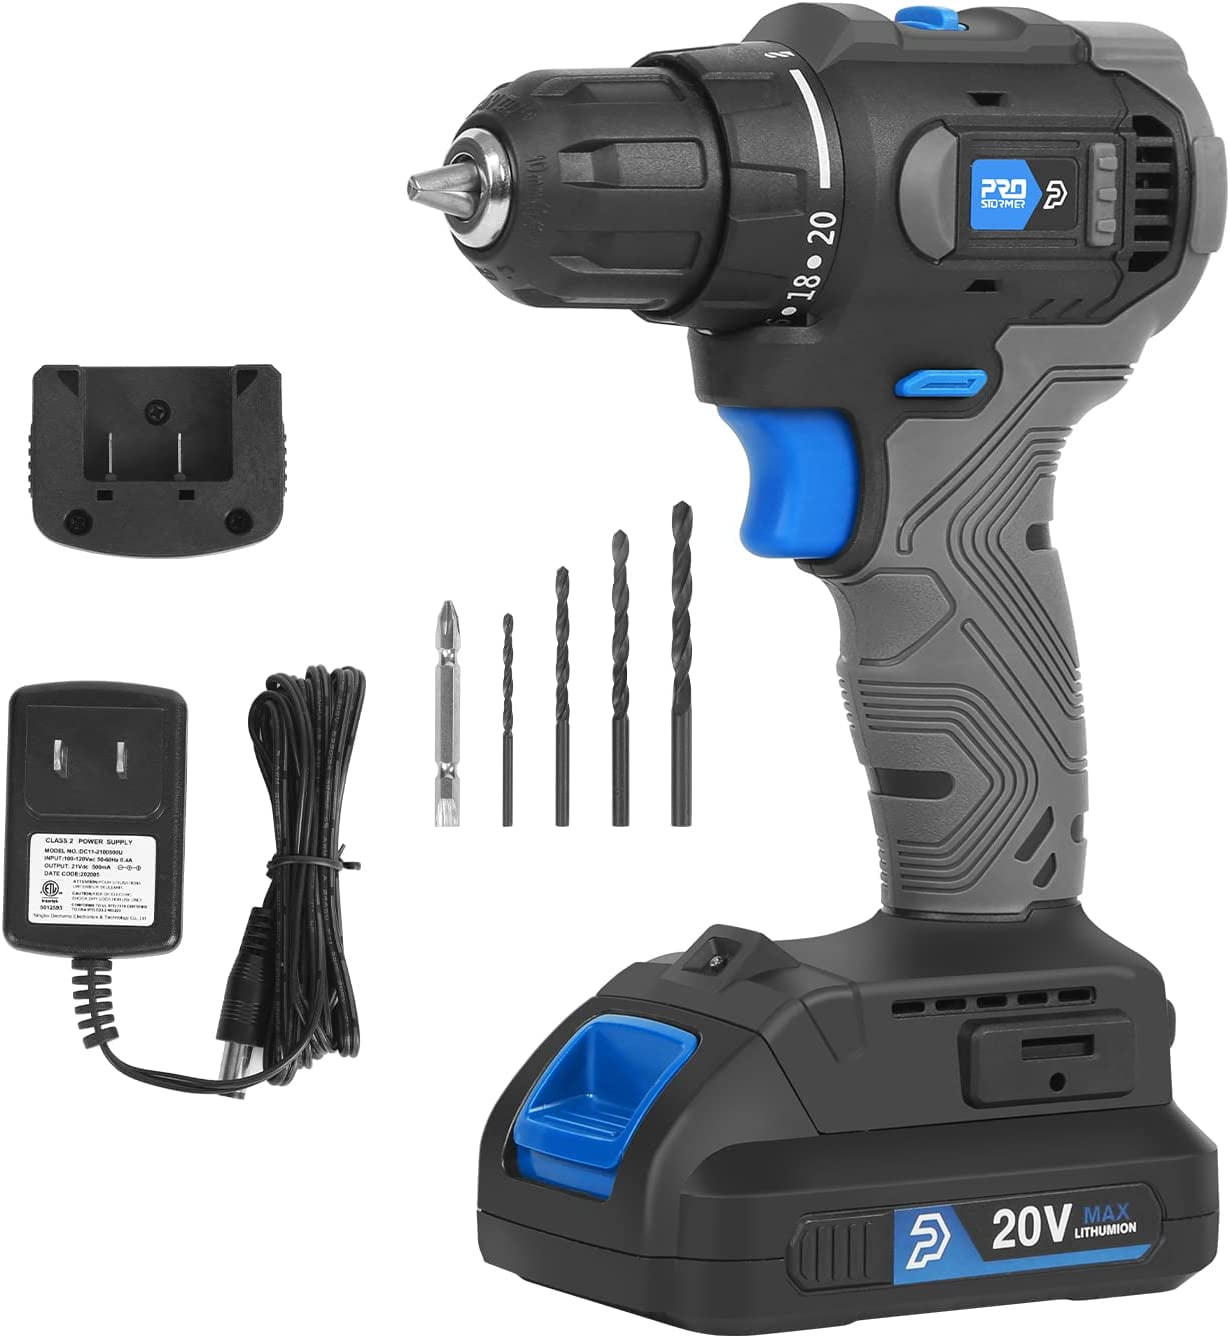 Portable Electric Drills - DT Online